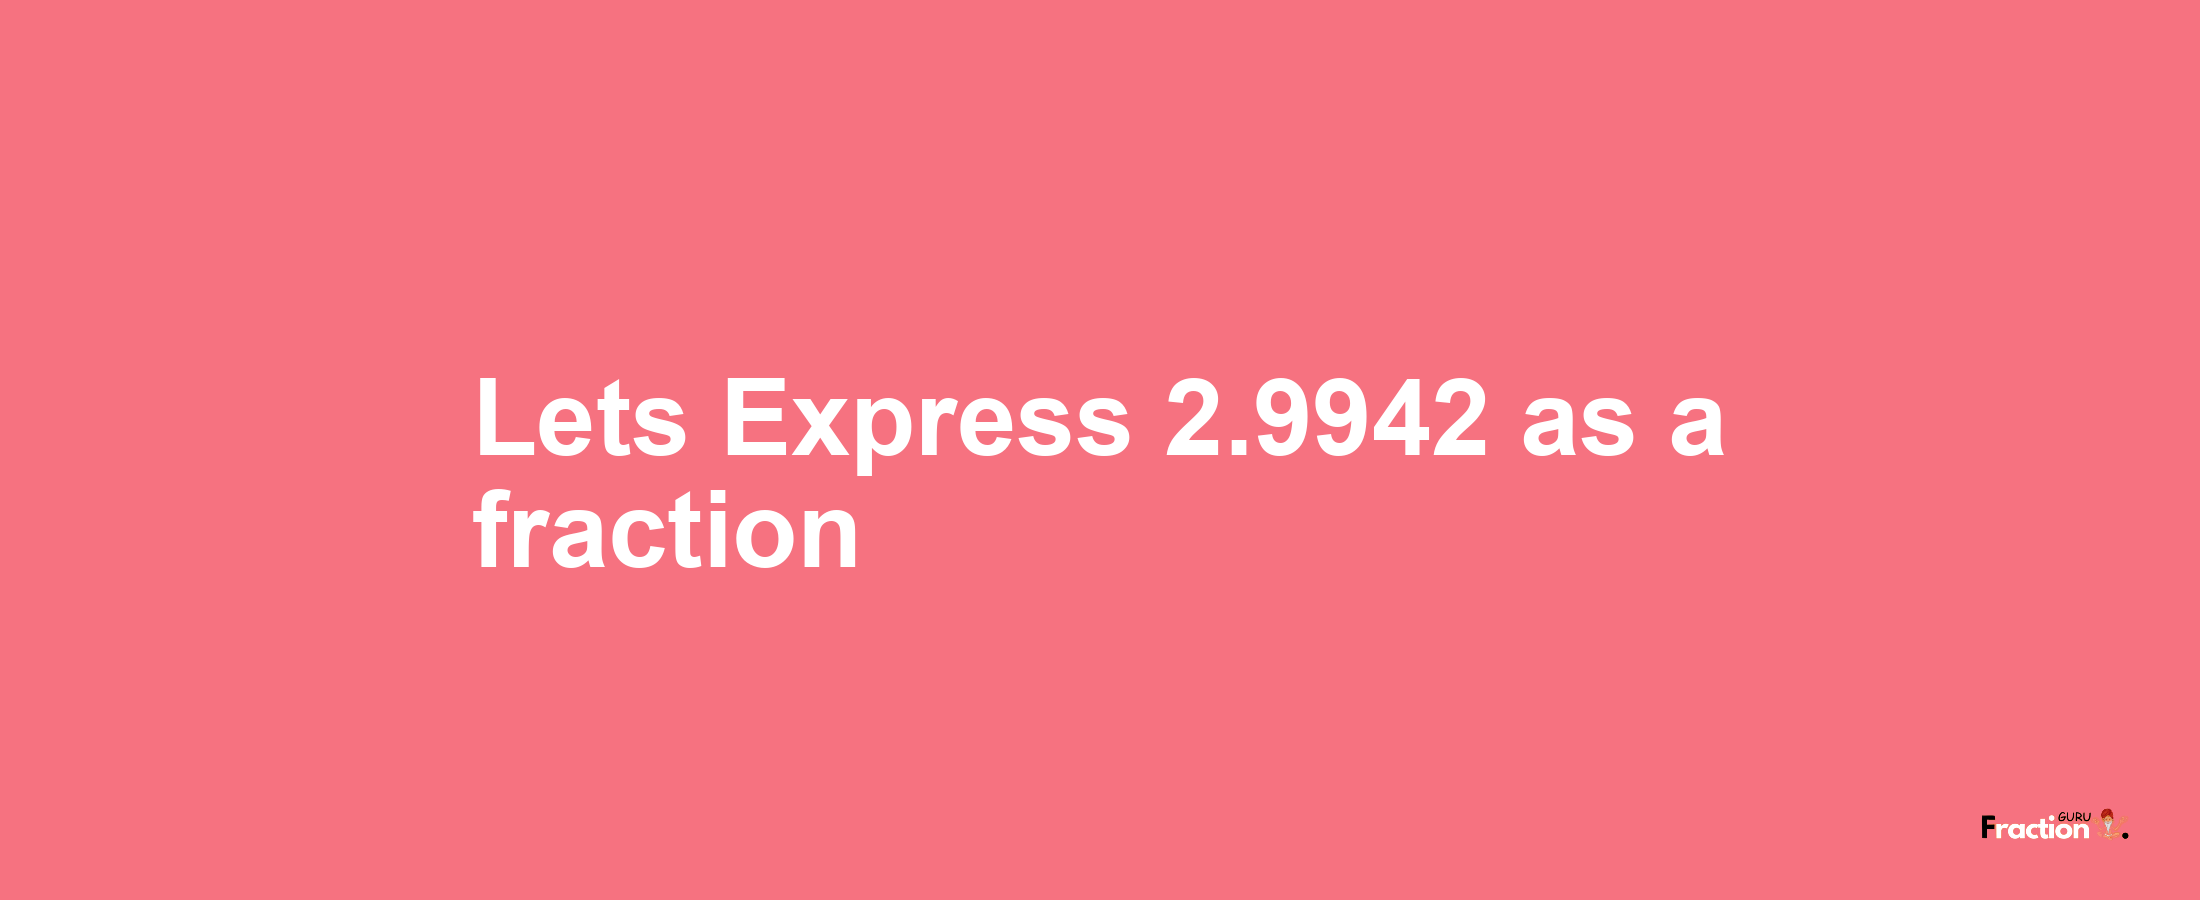 Lets Express 2.9942 as afraction